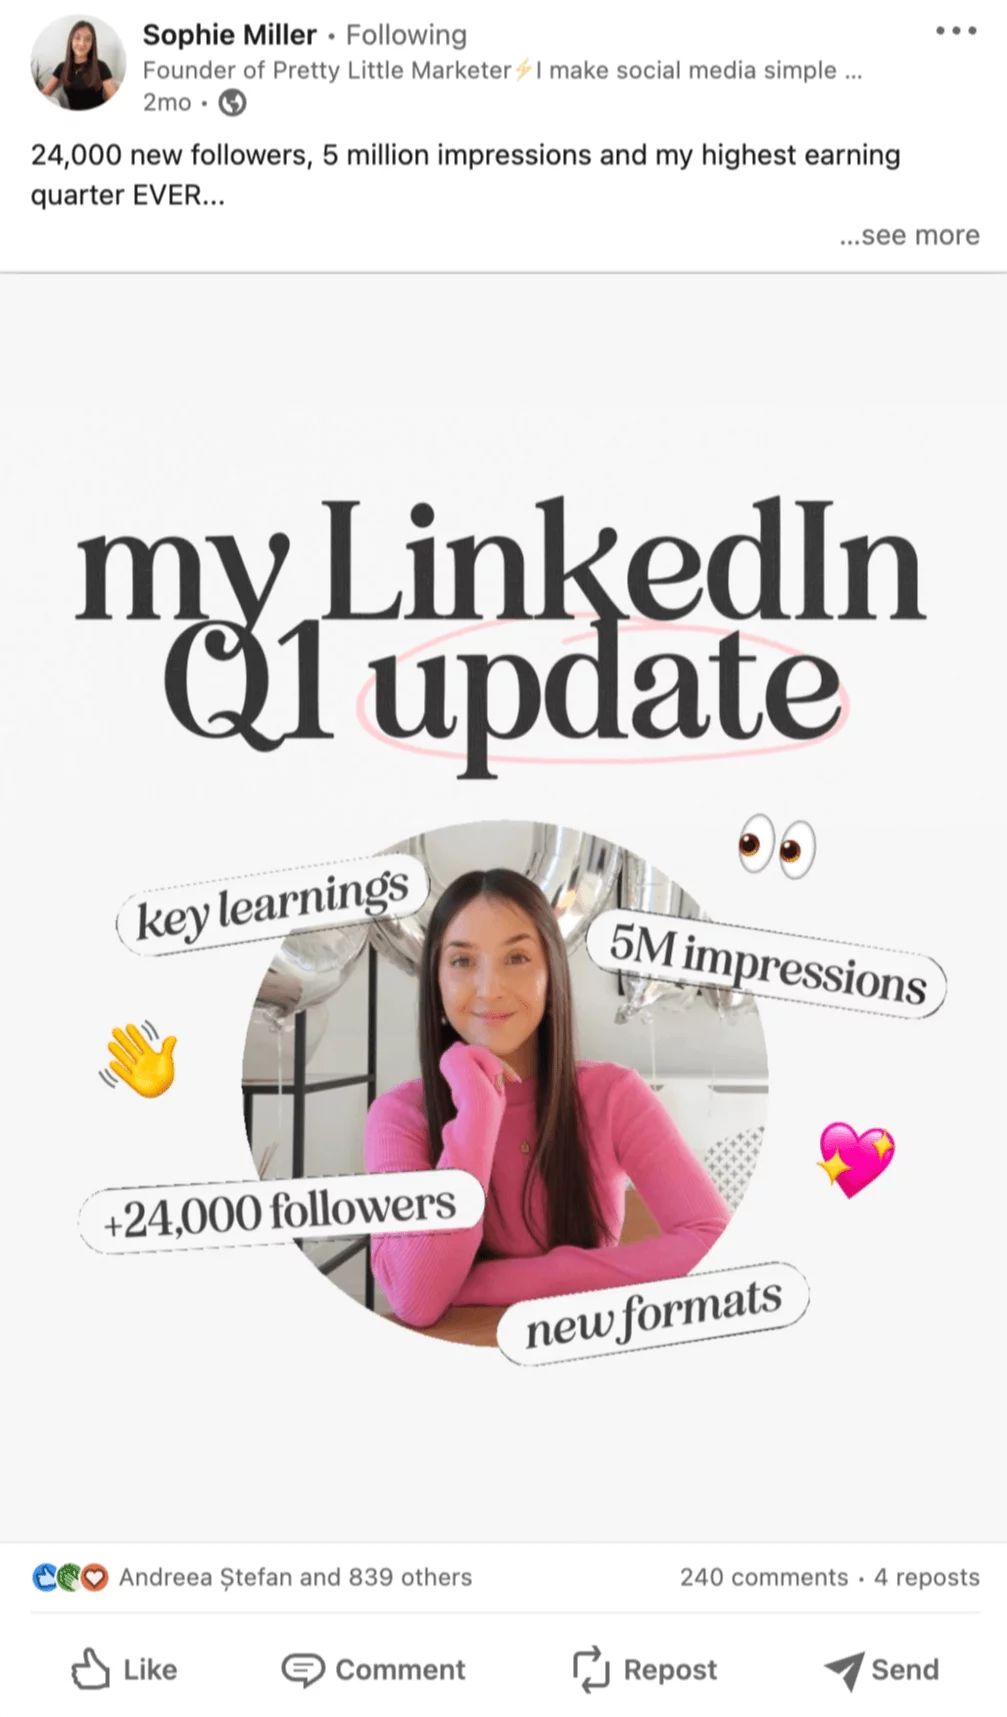 Sophie Miller's LinkedIn carousel quarterly update sharing her account growth in numbers: 24000 new followers and 5M impressions.